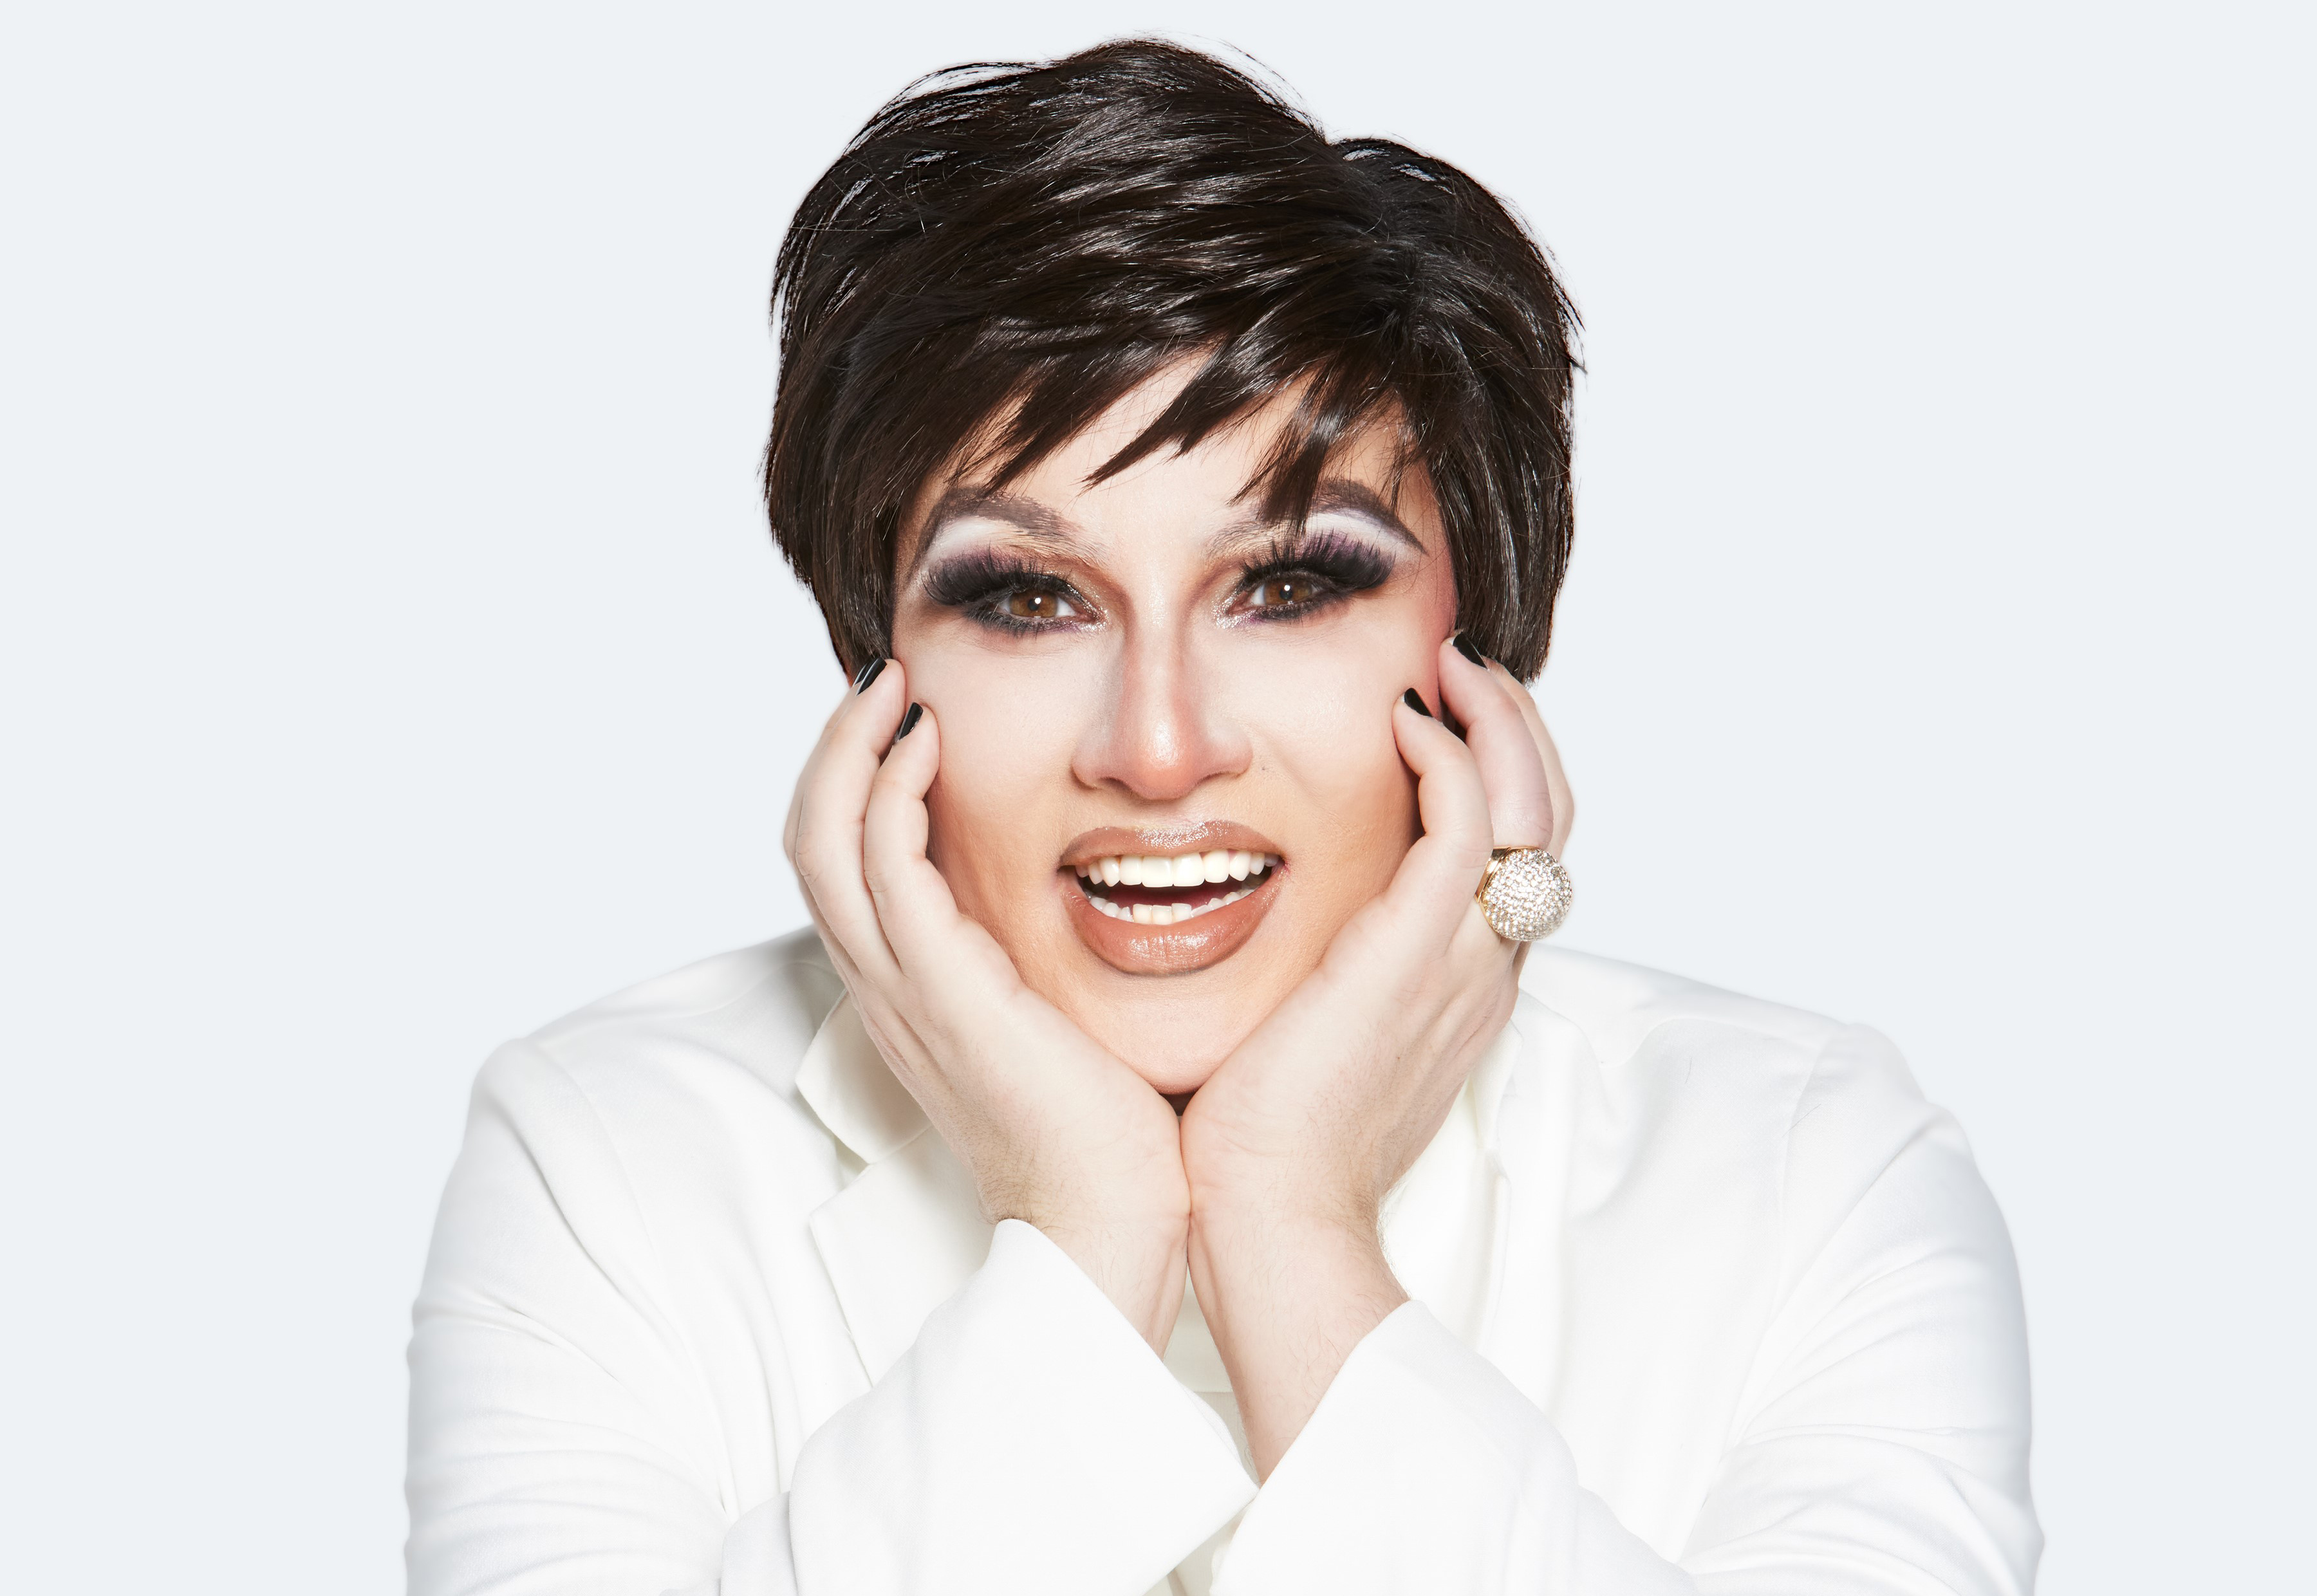 Ryan Raftery: Mother of the Year – The Kris Jenner Musical!